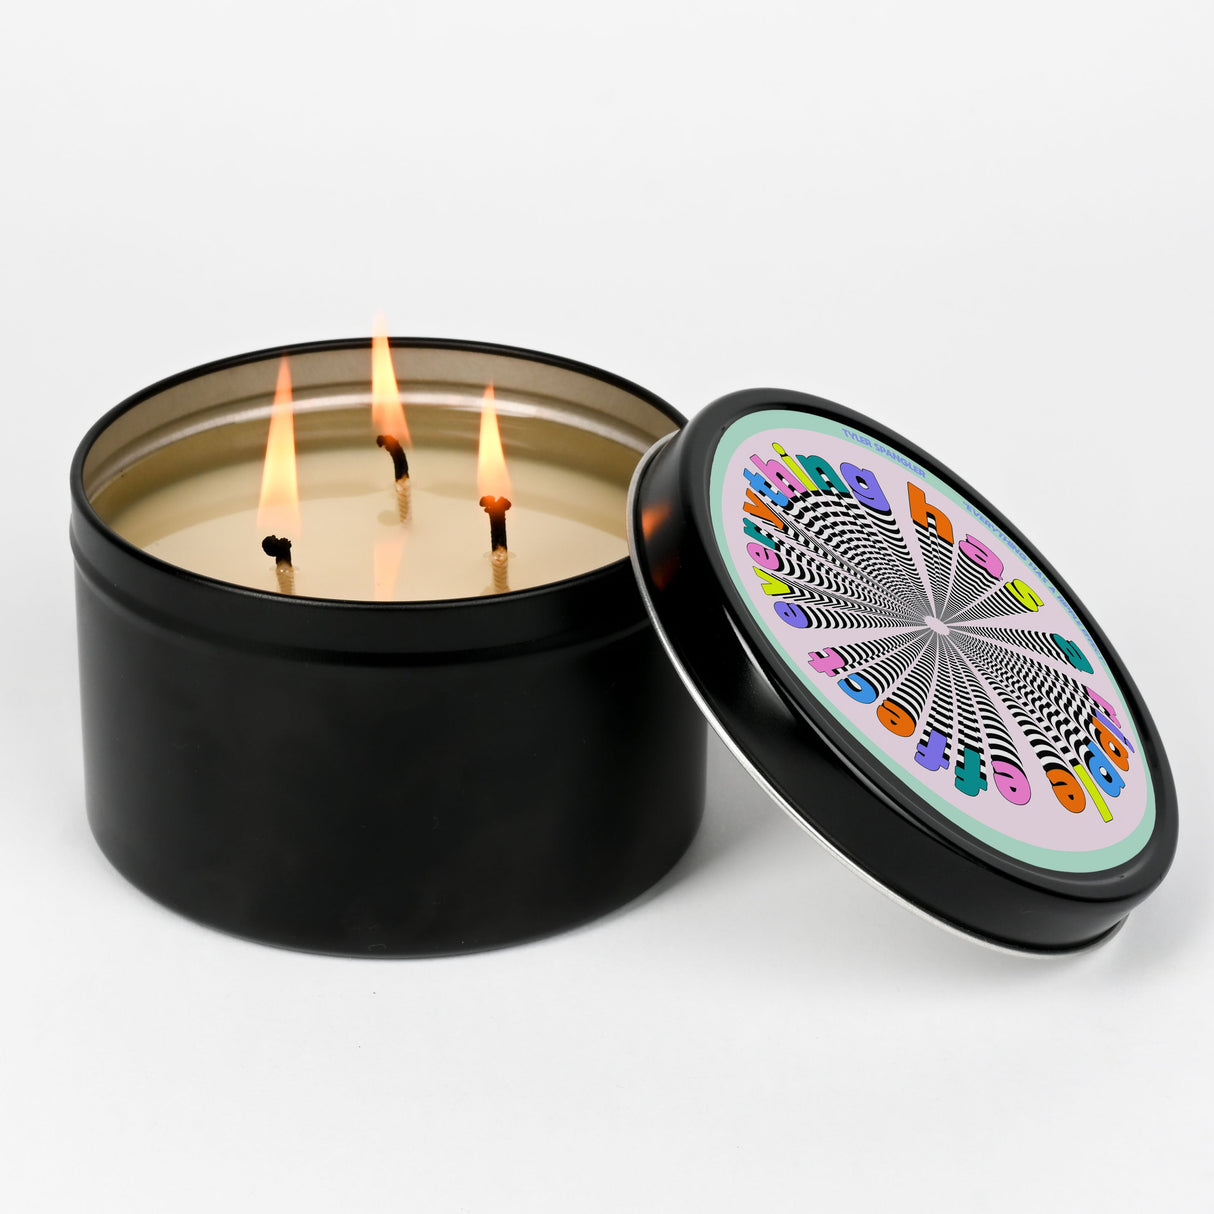 Tyler Spangler Scented Tin Candle I Ripple Effect I Premium Scented Candle